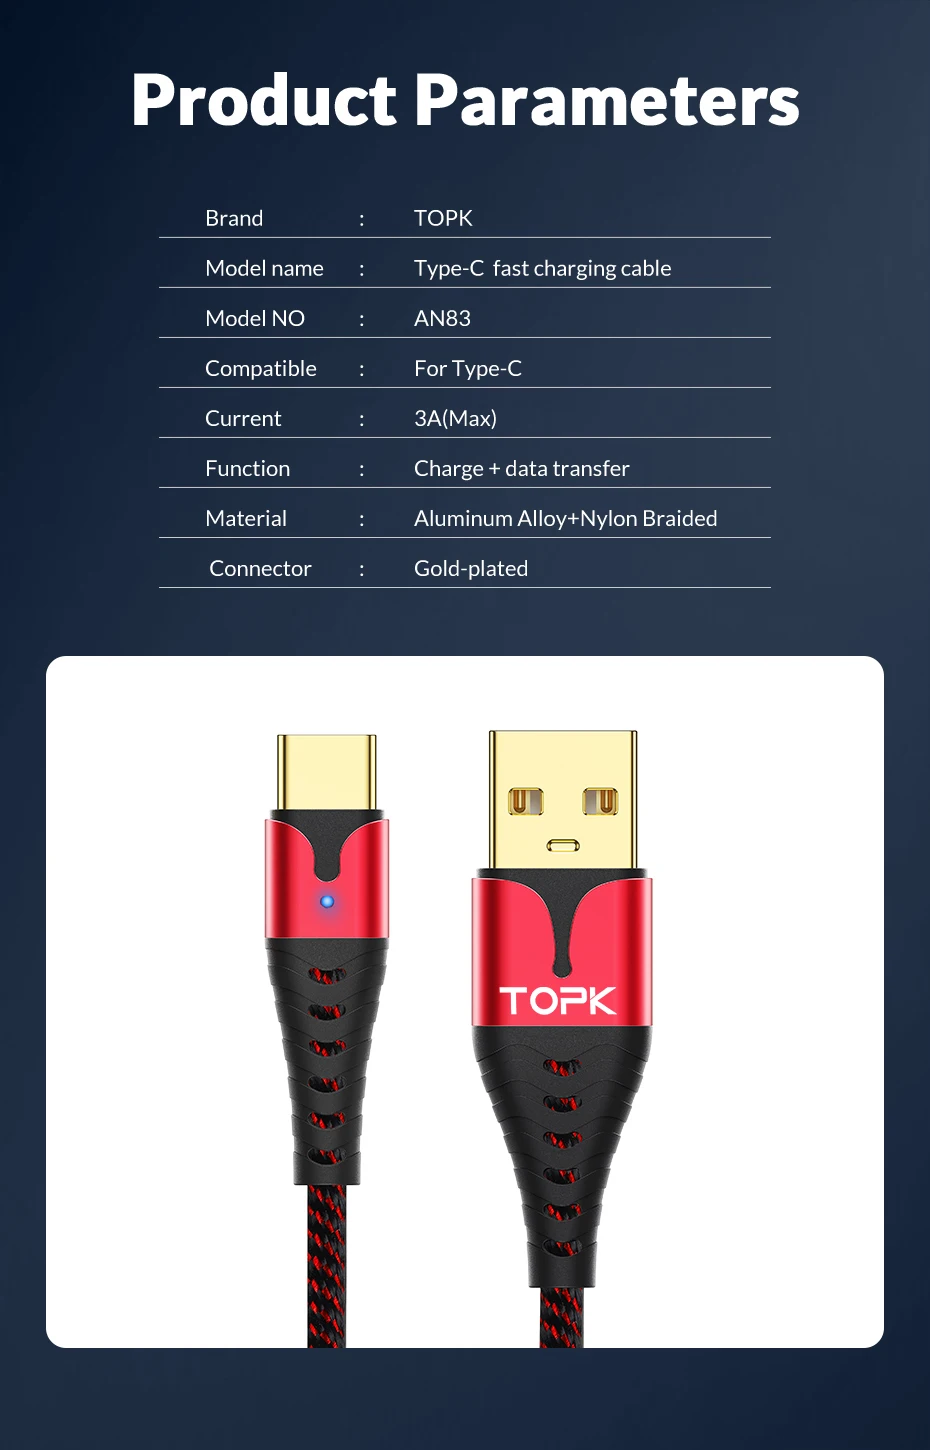 TOPK LED USB Type C Cable for Samsung S9 S8 Fast Charging Type-C Data Charge USBC Mobile Phone Cable for Xiaomi mi9 Redmi note 7